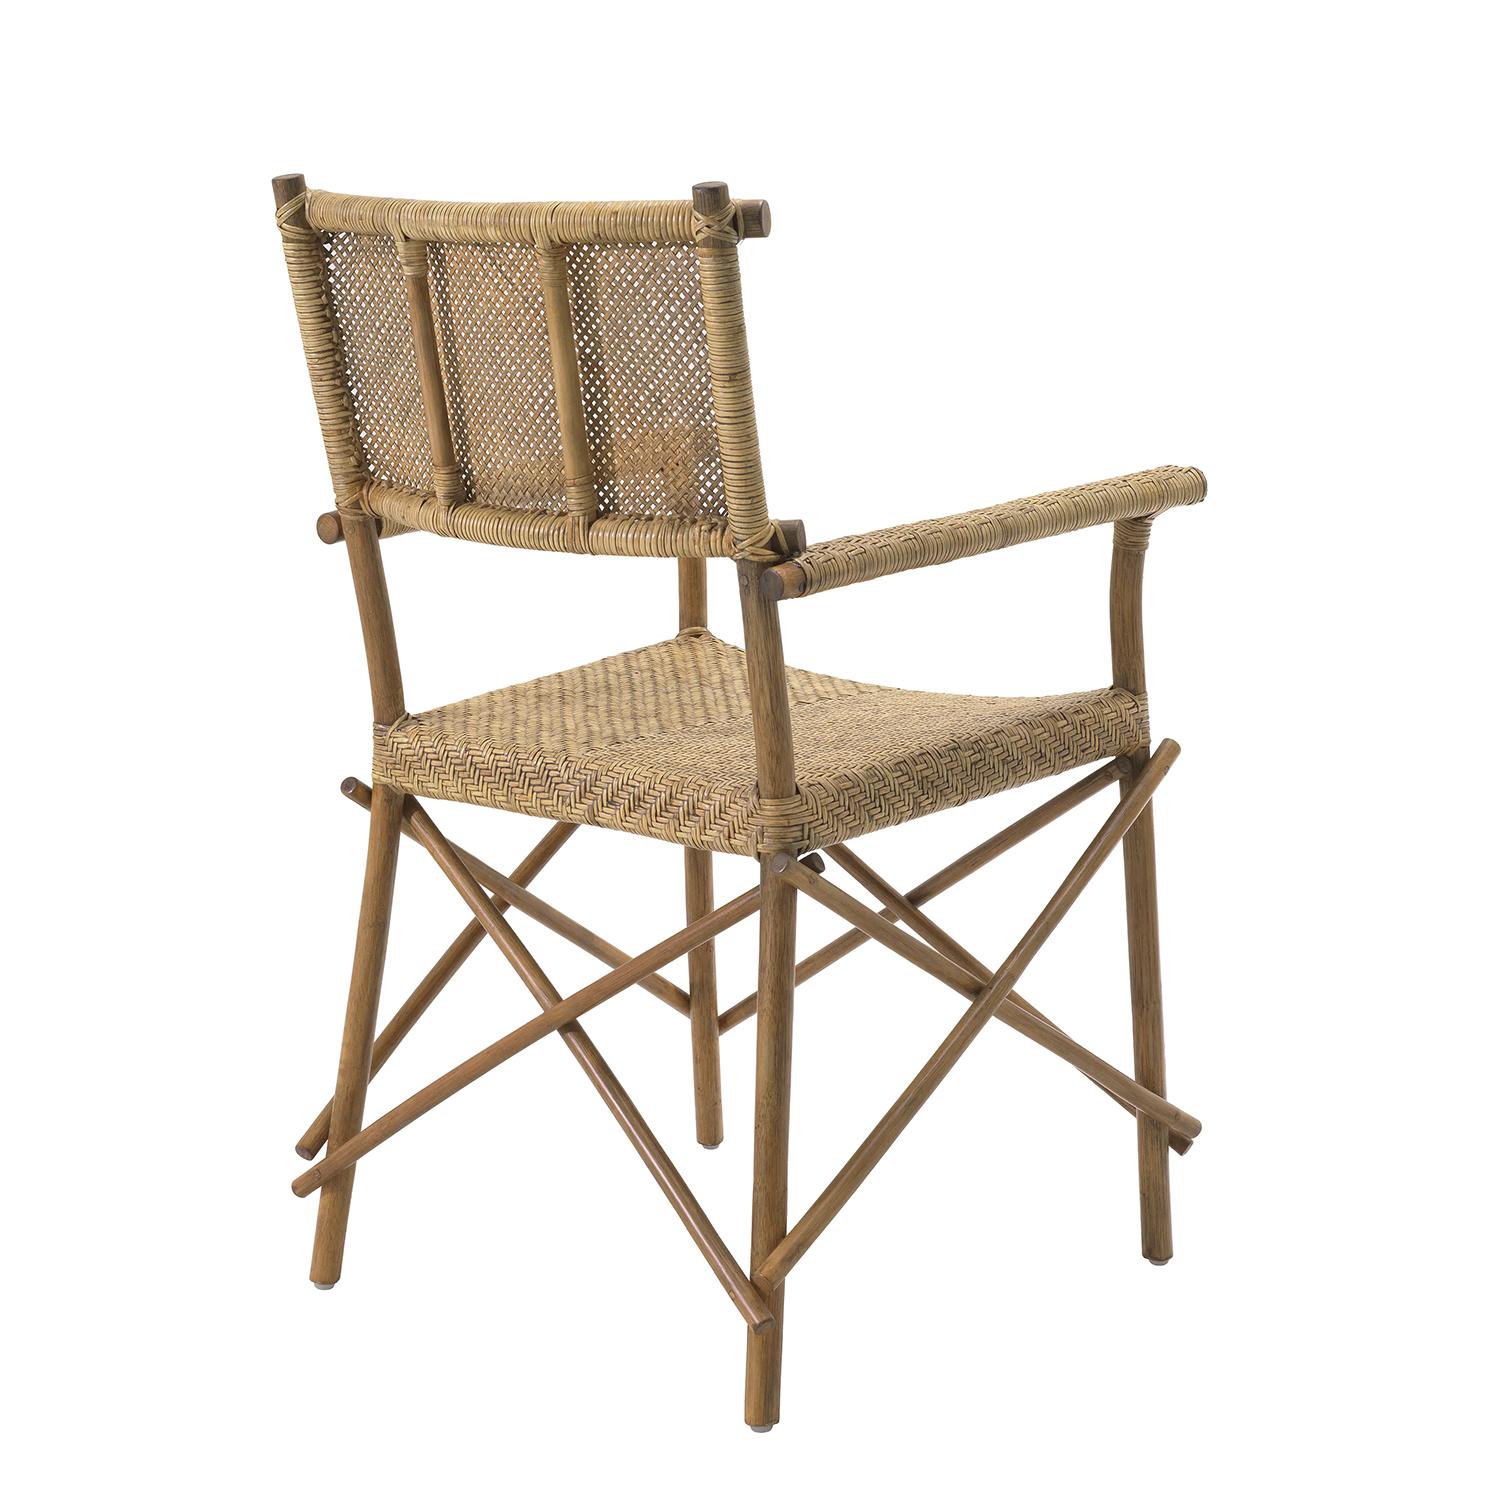 Indonesian Rattan Indo Chair For Sale